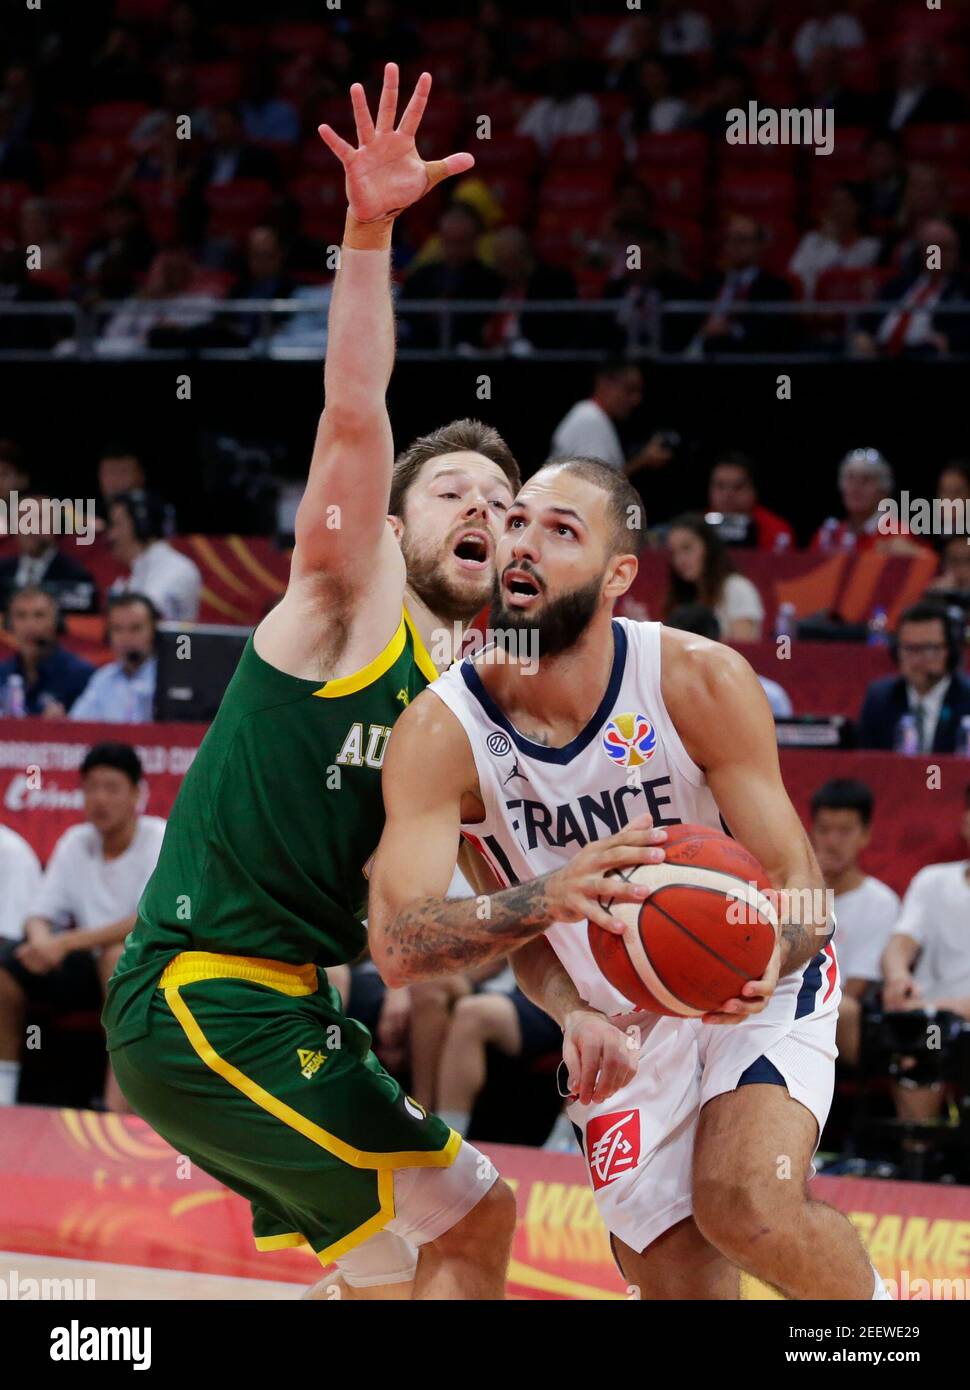 Basketball - FIBA World Cup - 3rd Place Game - France v Australia - Wukesong Sport Arena, Beijing, China - September 15, 2019  France's Evan Fournier in action with Australia's Matthew Dellavedova REUTERS/Jason Lee Stock Photo